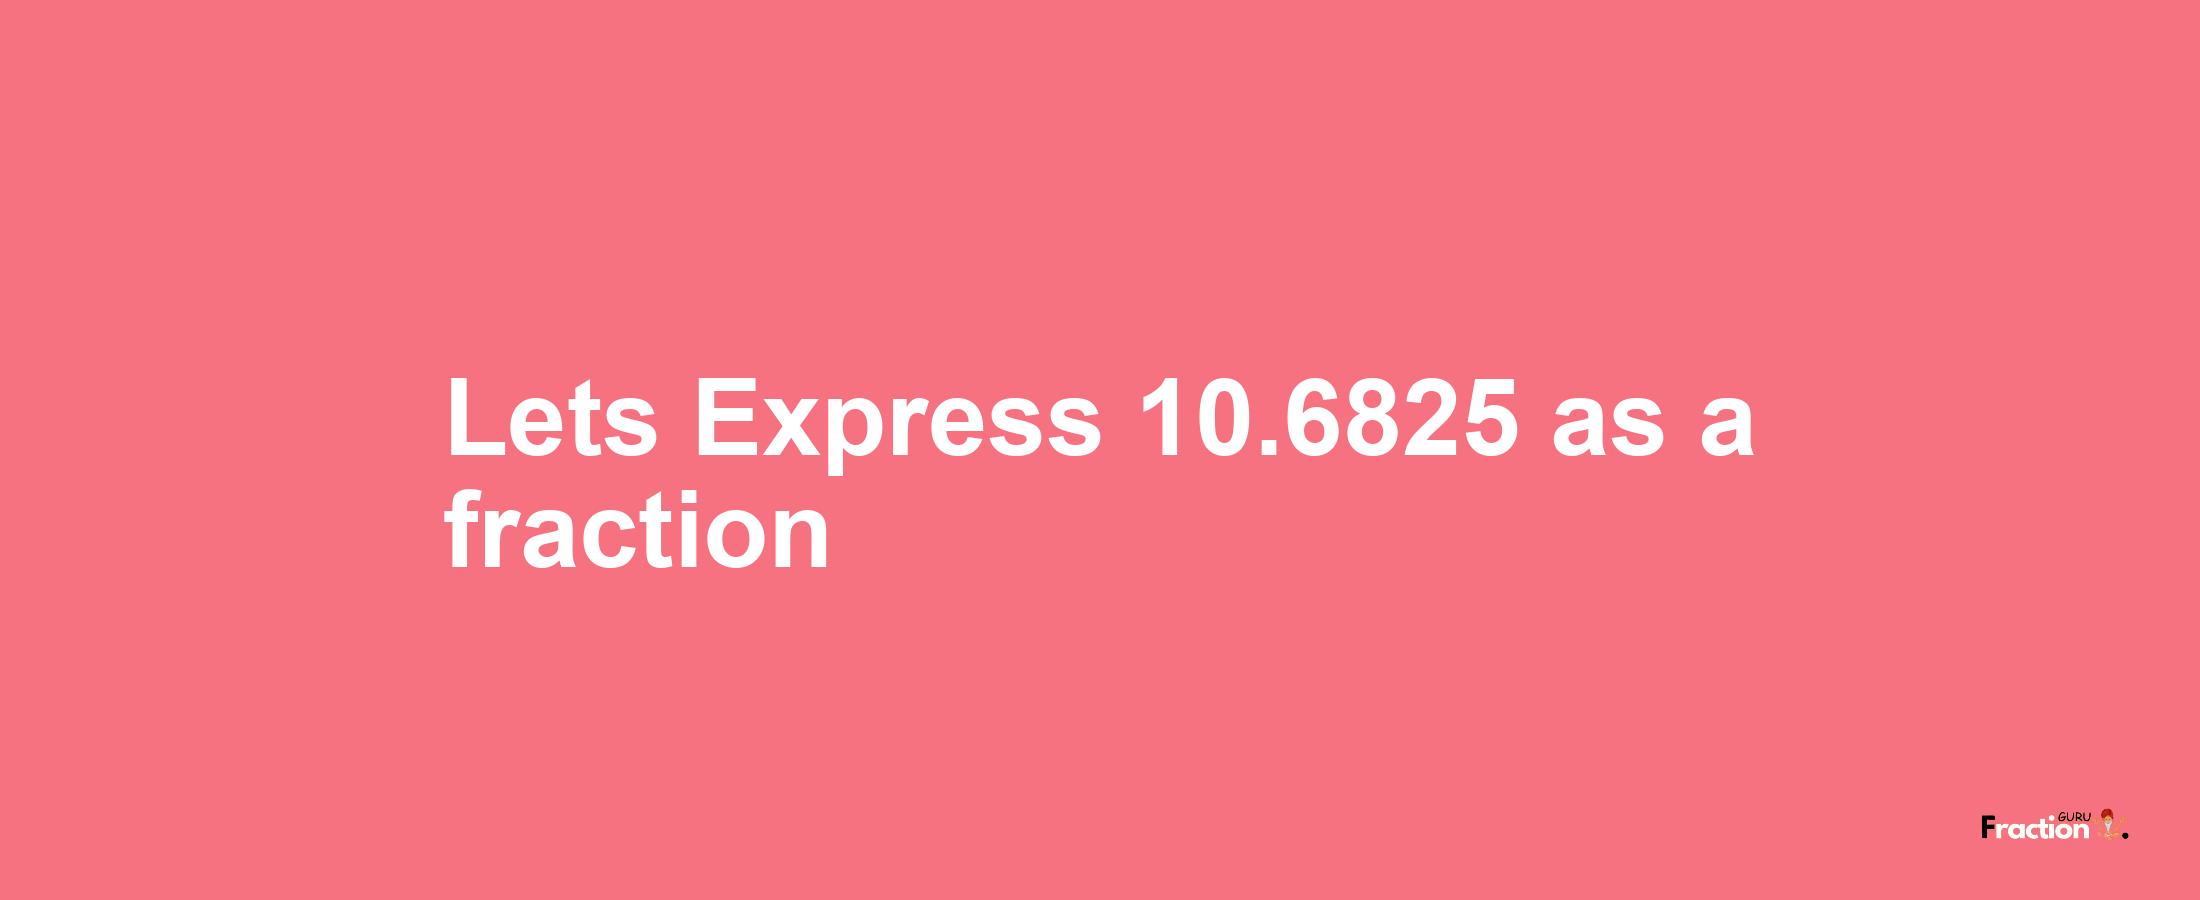 Lets Express 10.6825 as afraction